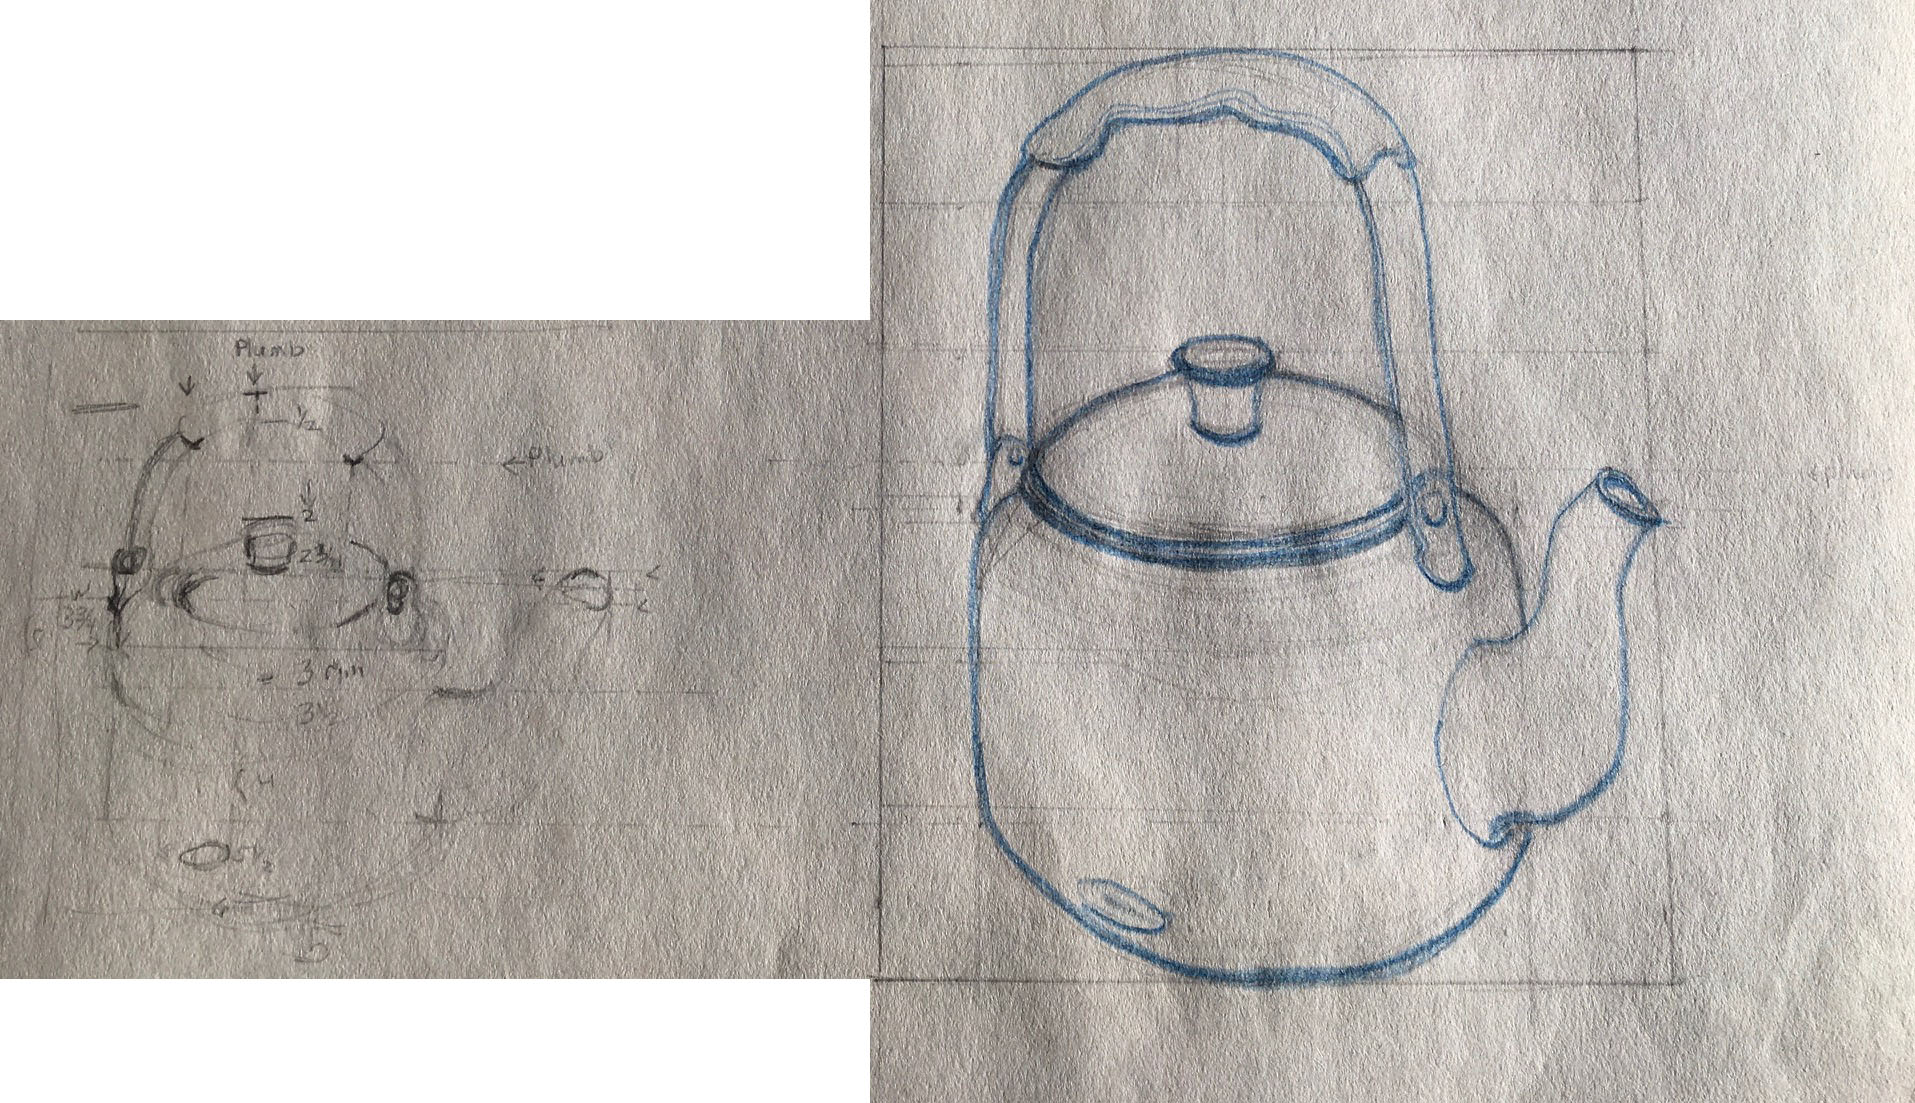 Teapot, 2018
Pencil and Colored Pencil on Paper
12.5"W x 7.5"H, Walli White, artist